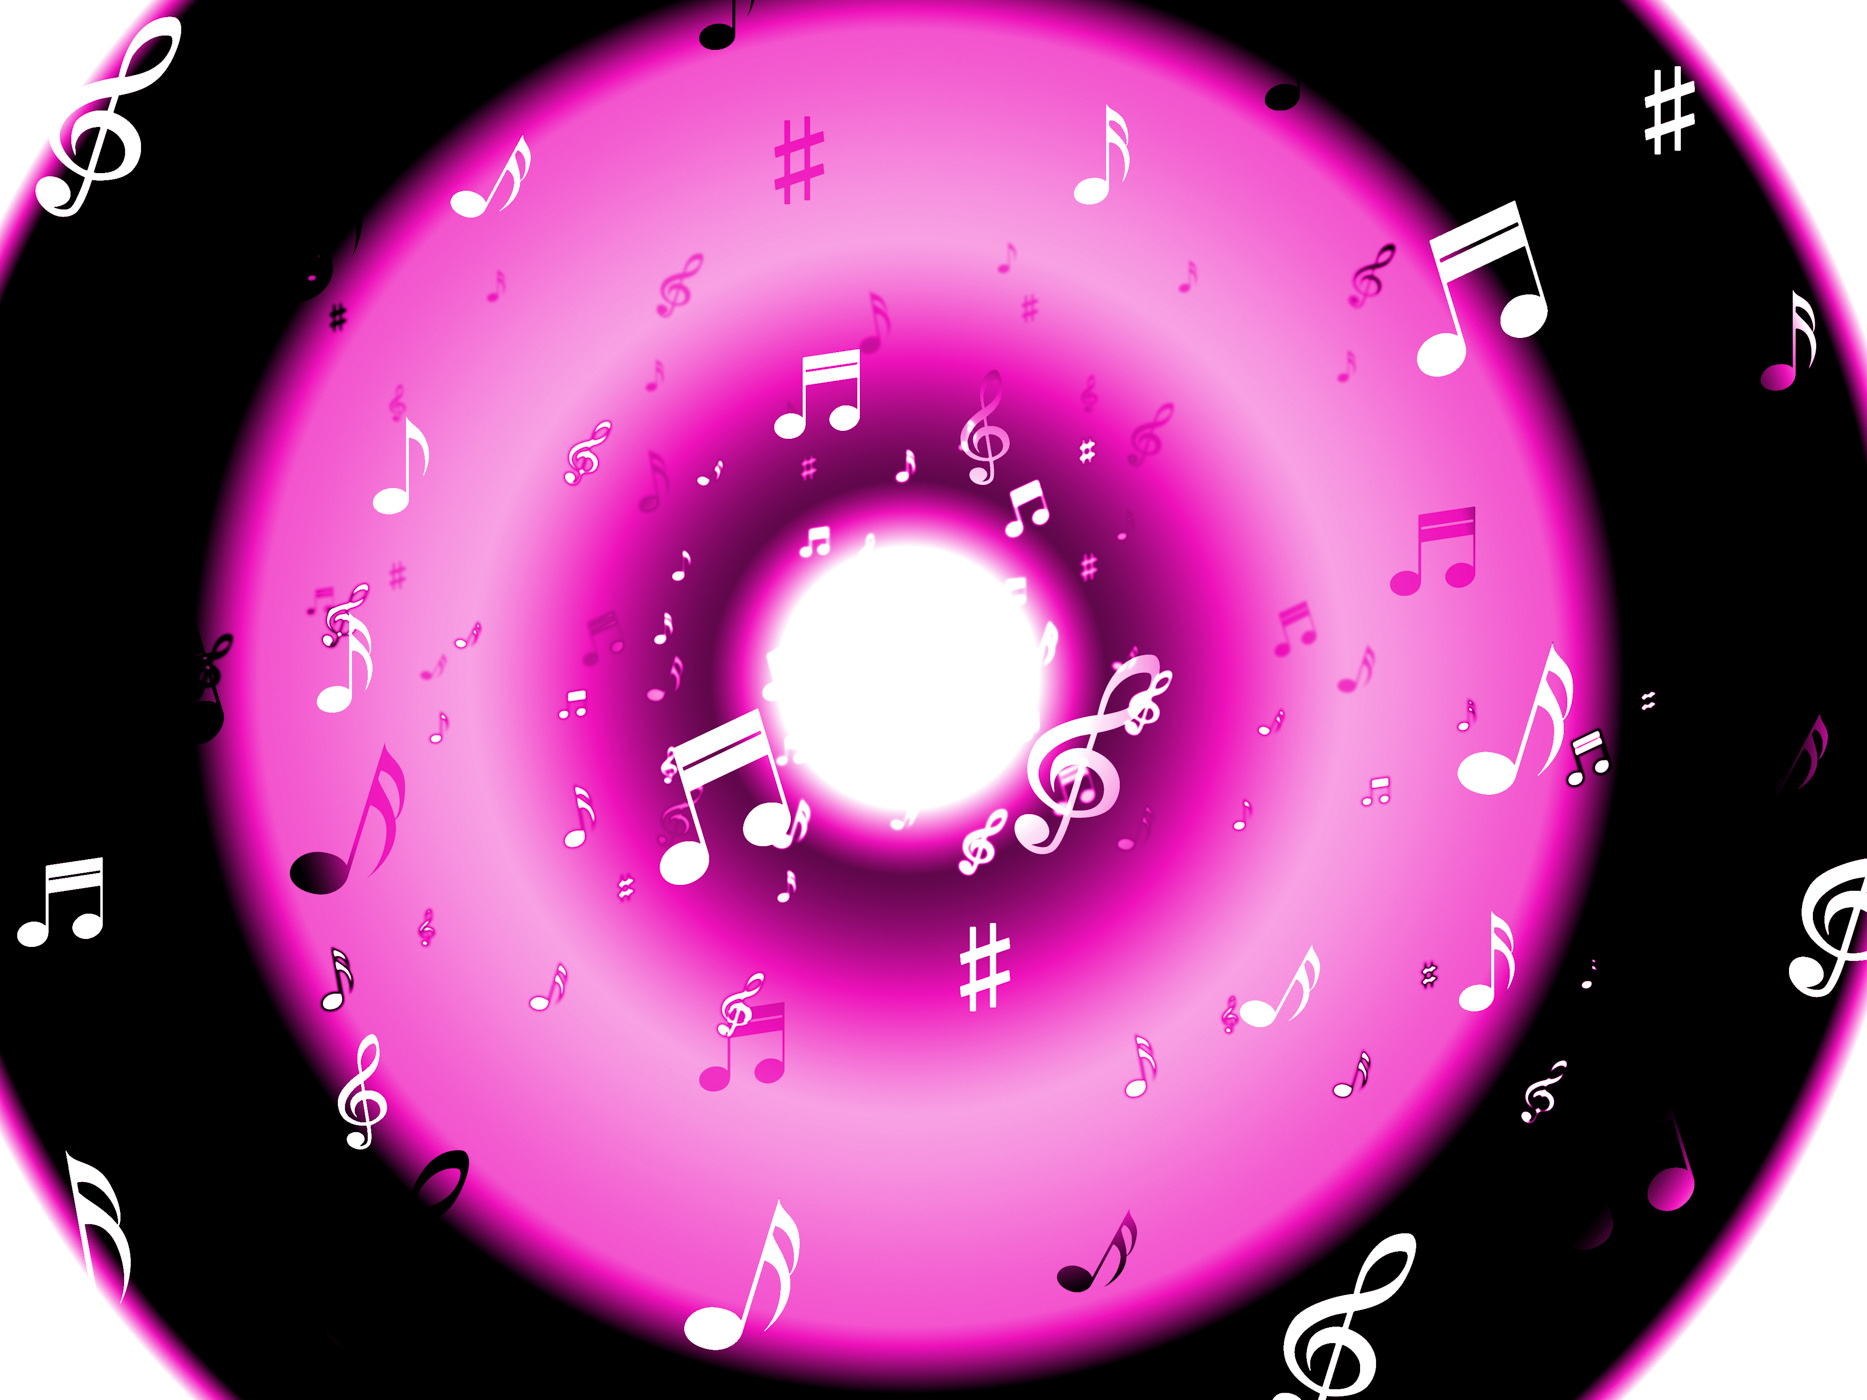 Musical notes background shows musical wallpaper or digital art photo